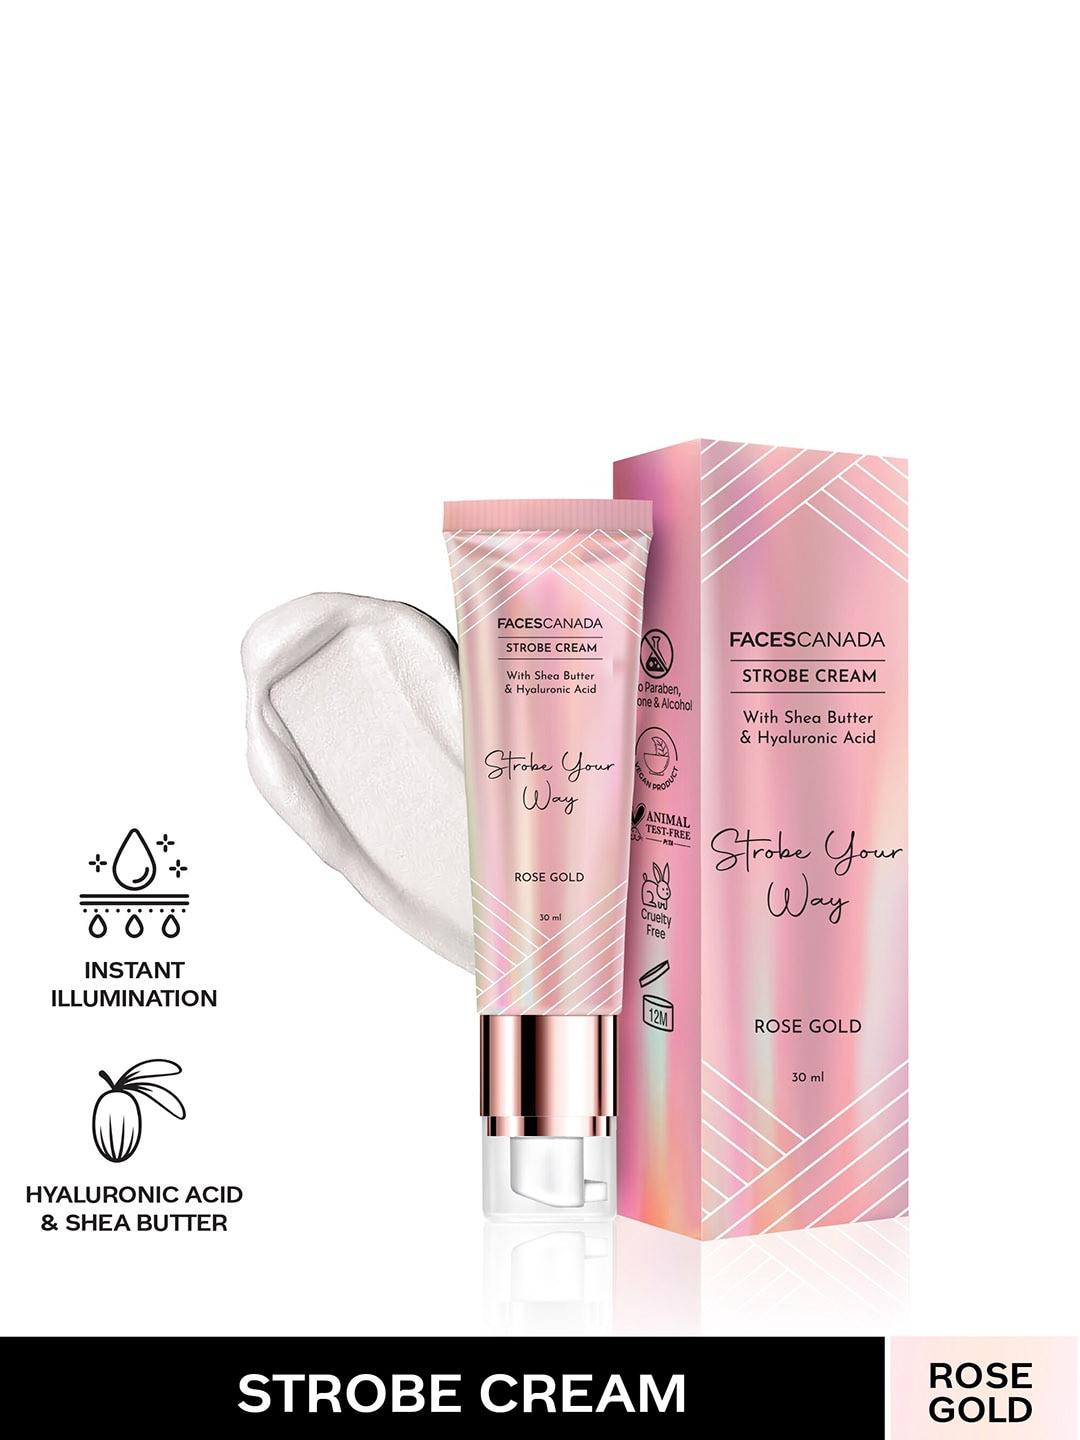 FACES CANADA Strobe Your Way Strobe Cream with Shea Butter & HA 30 ml - Rose Gold